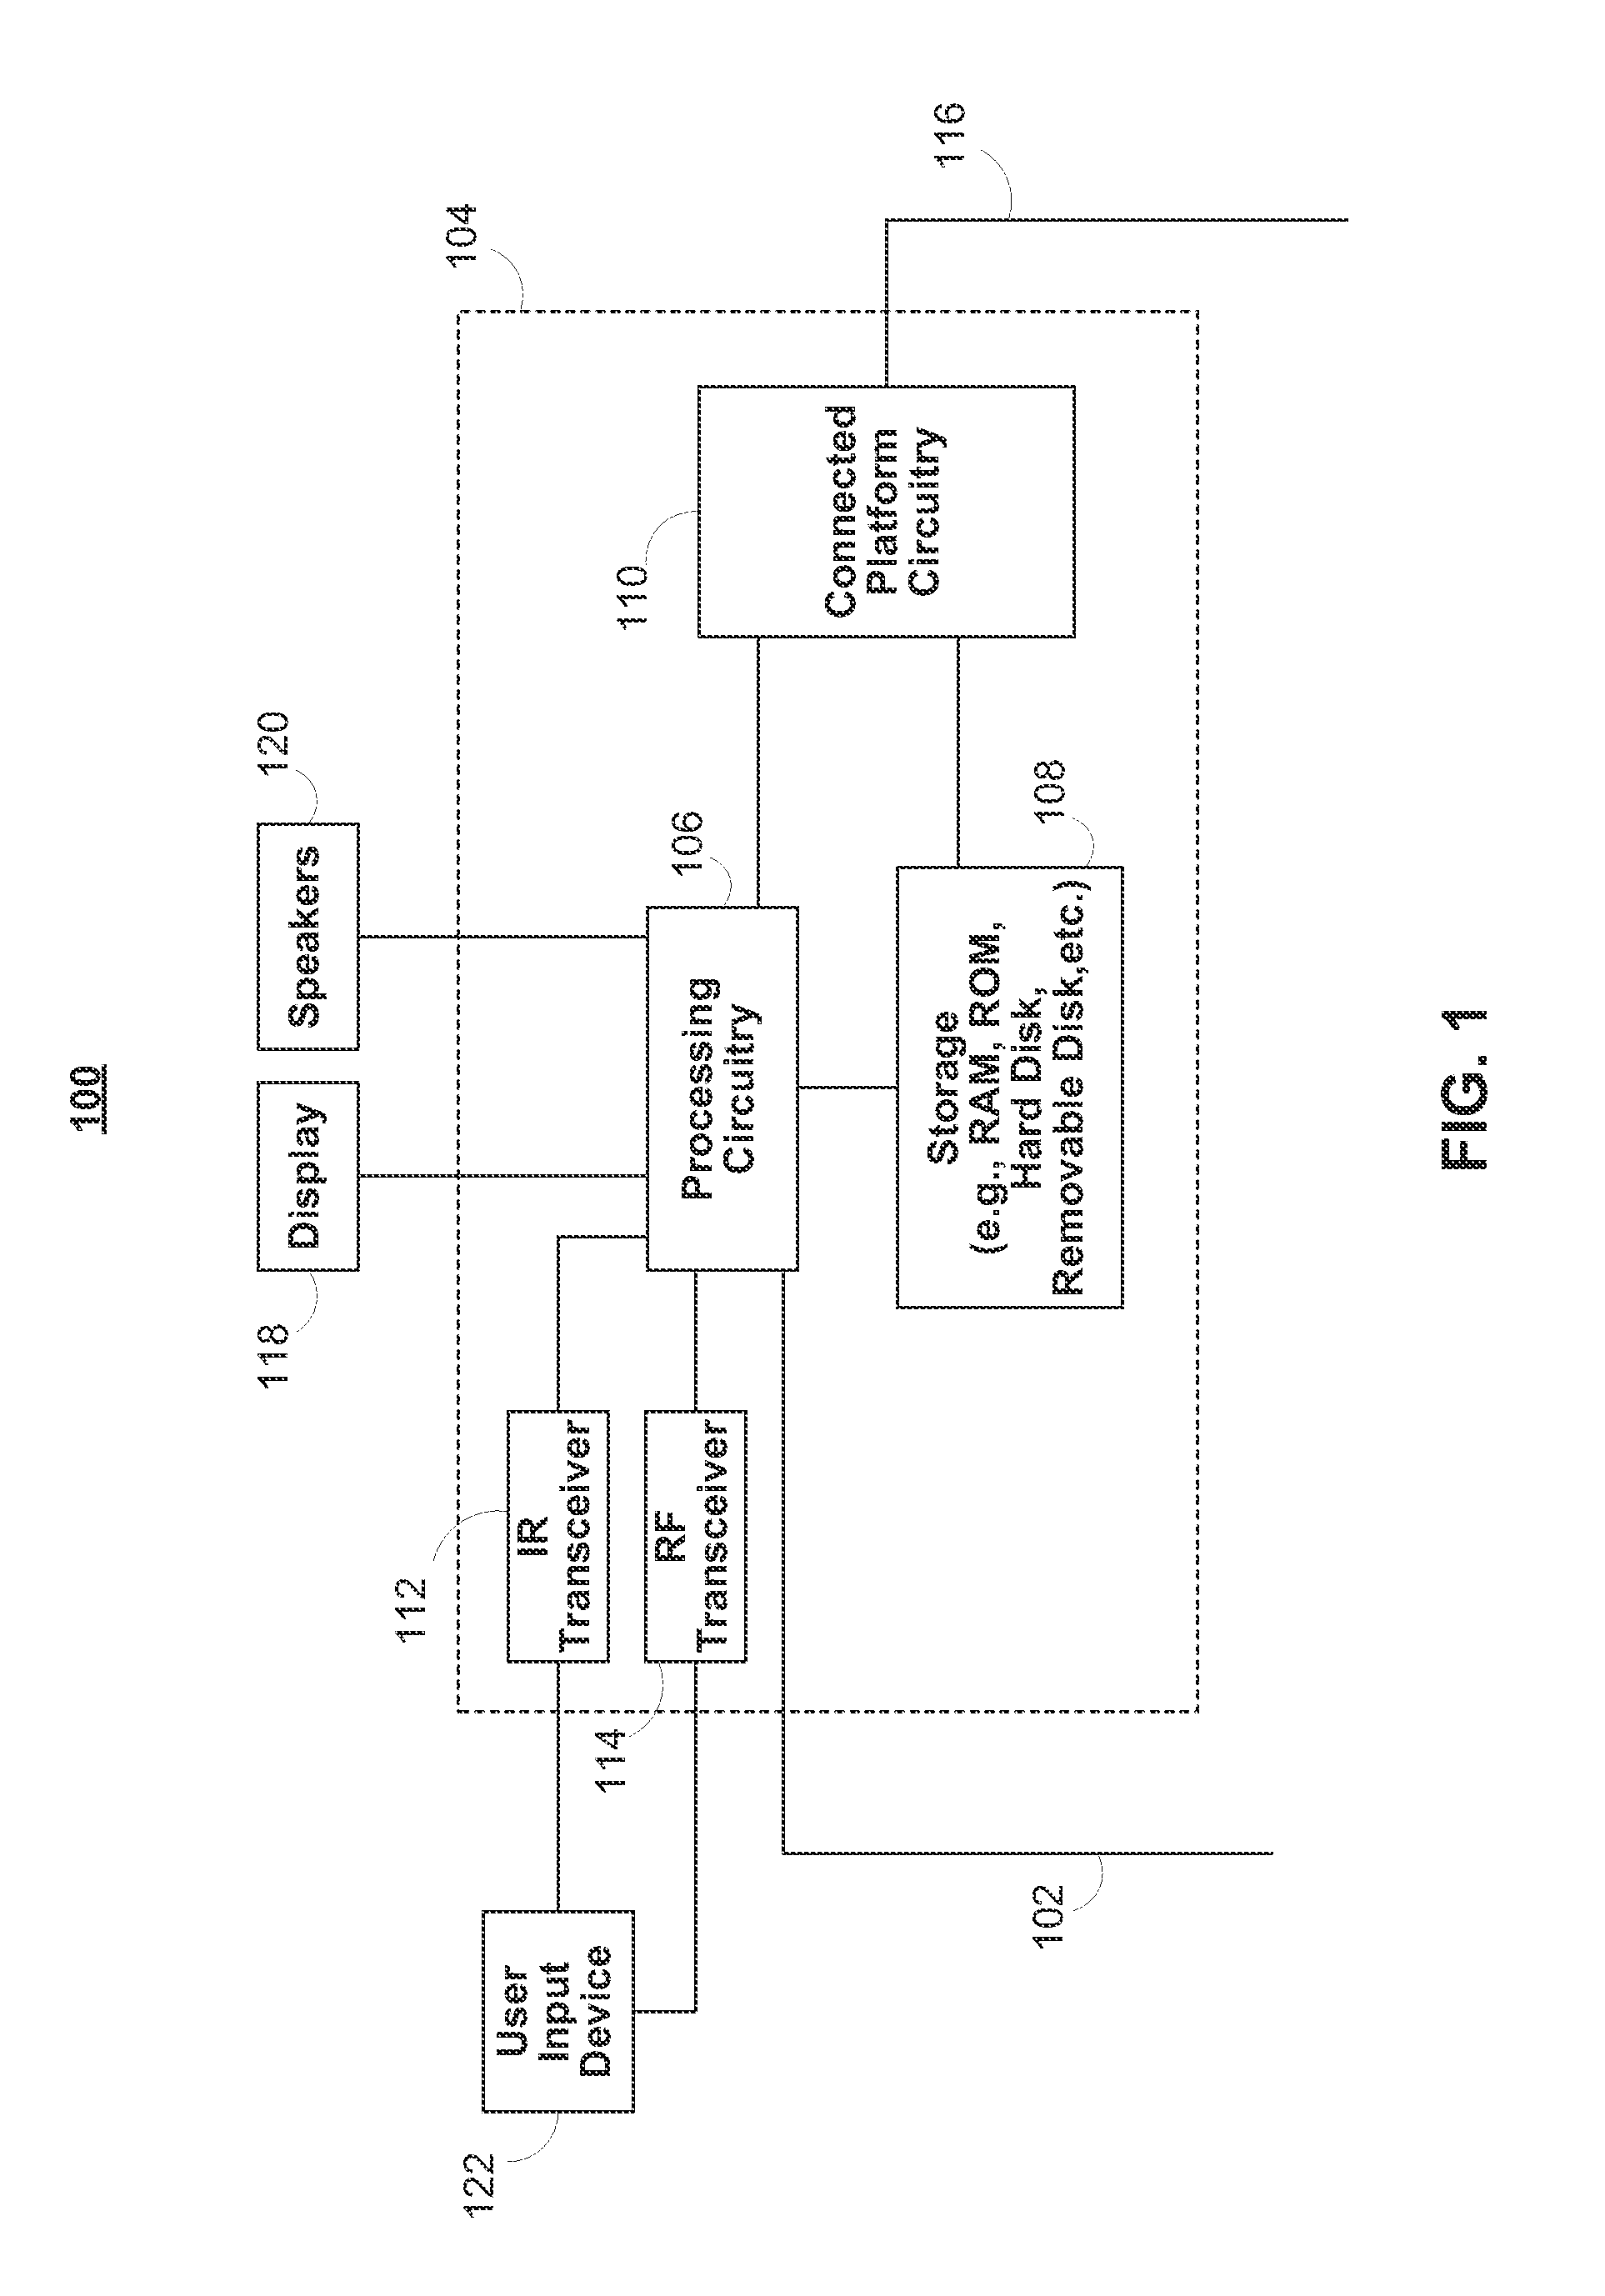 Systems and methods for controlling multiple user access to media devices in a connected platform environment